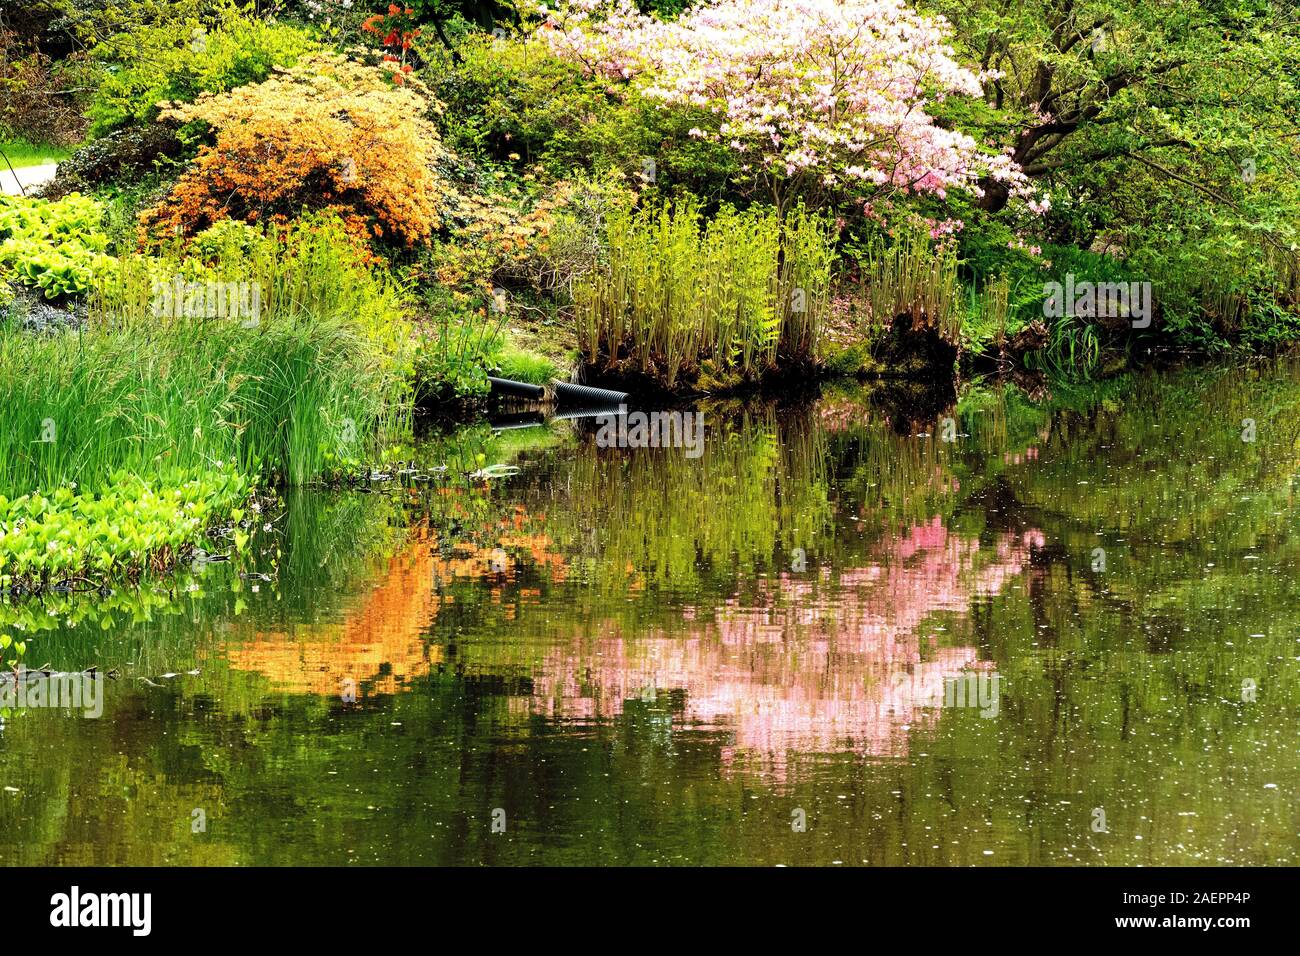 Reflections in pond of The Savill botanical garden in Egham, Surrey, UK Stock Photo